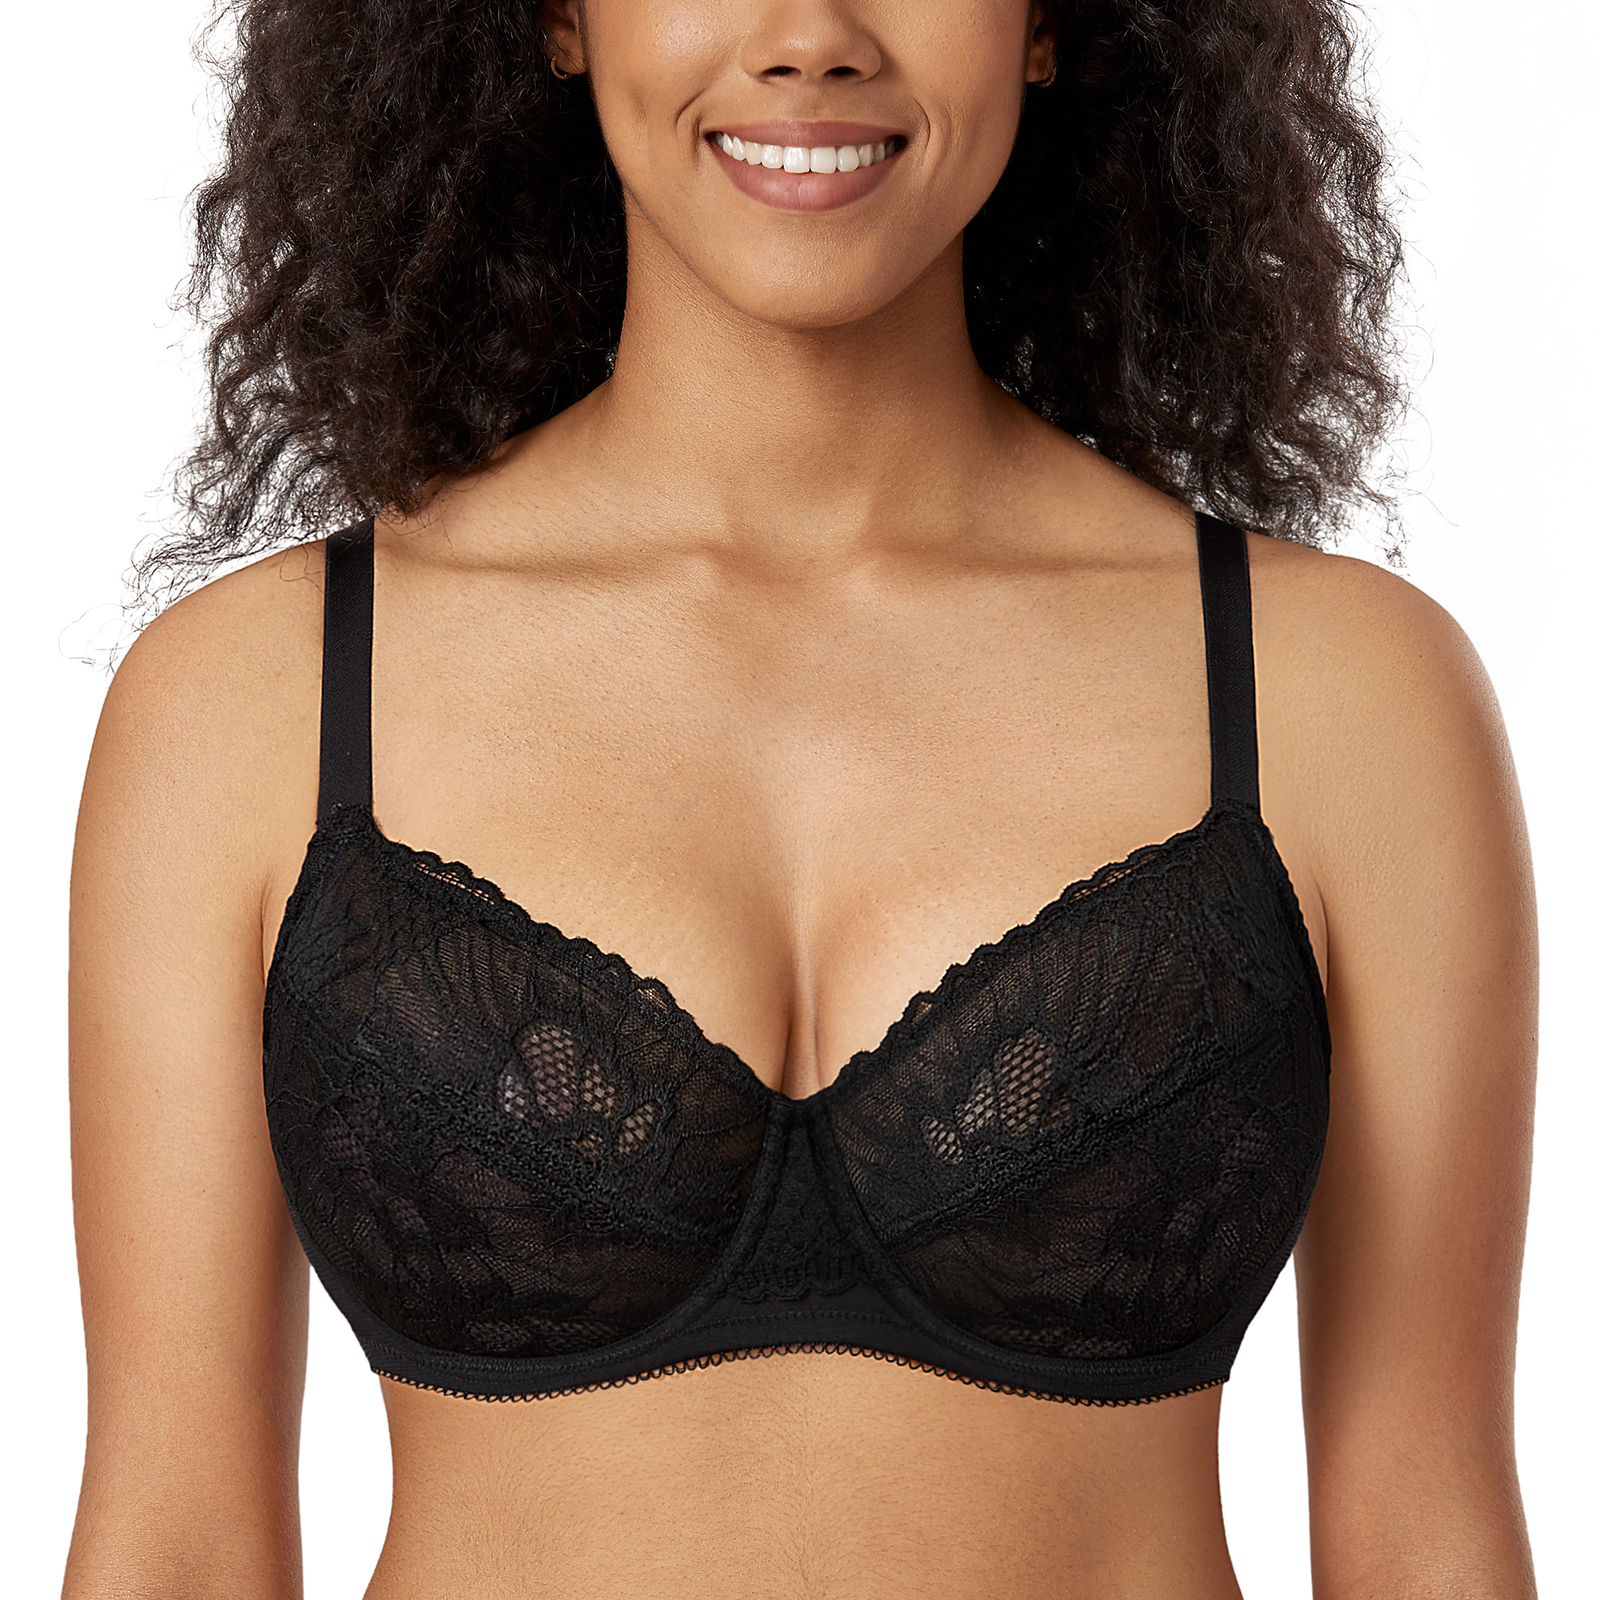 Women's Floral Lace Minimizer Bra Smooth Underwire Full Coverage